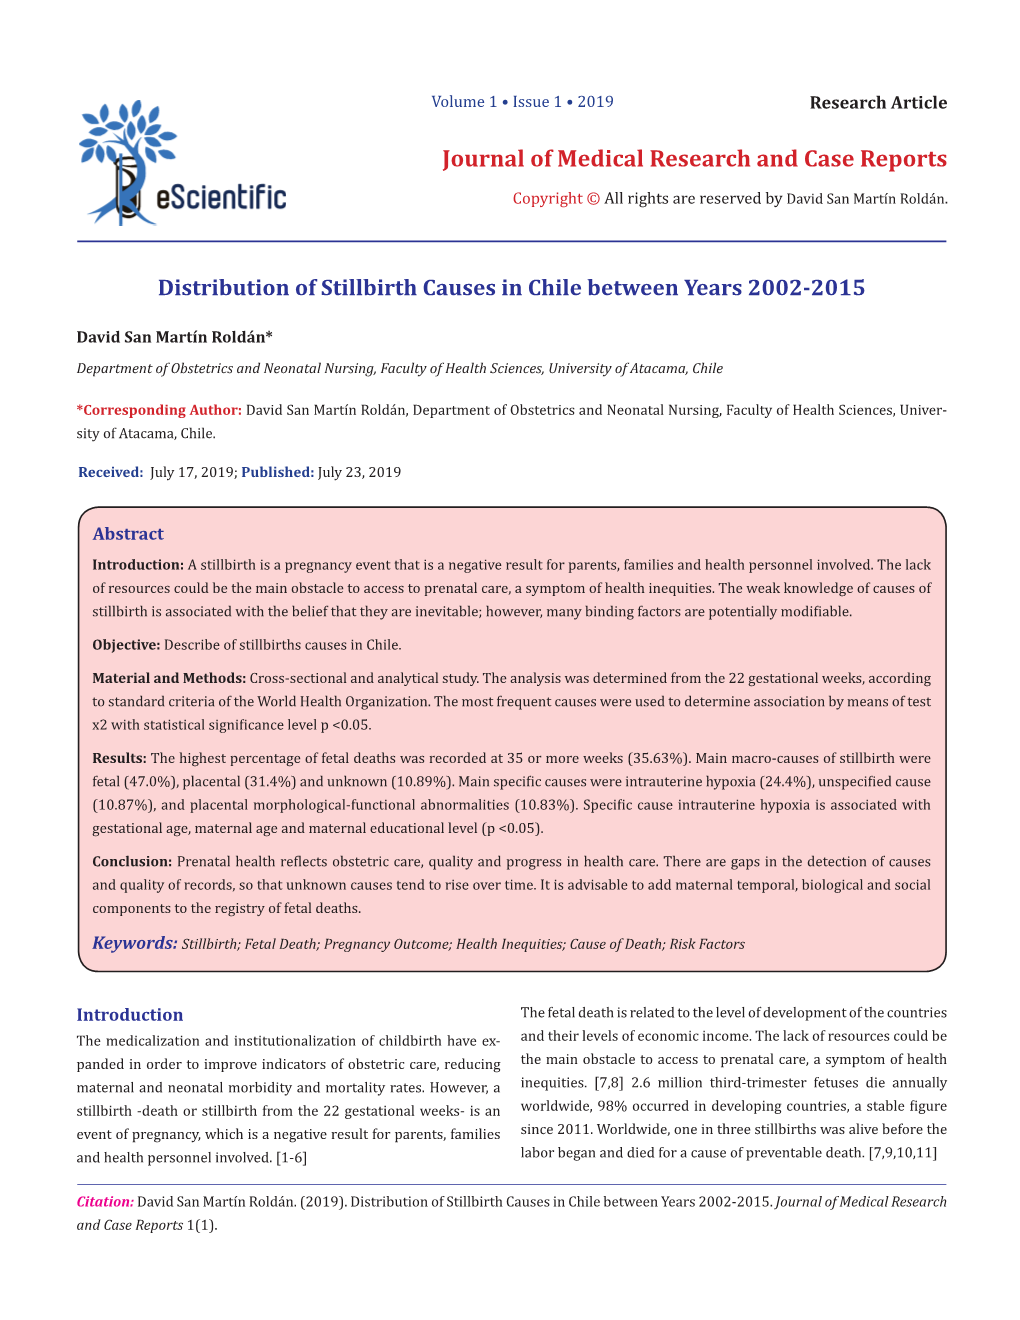 Journal of Medical Research and Case Reports